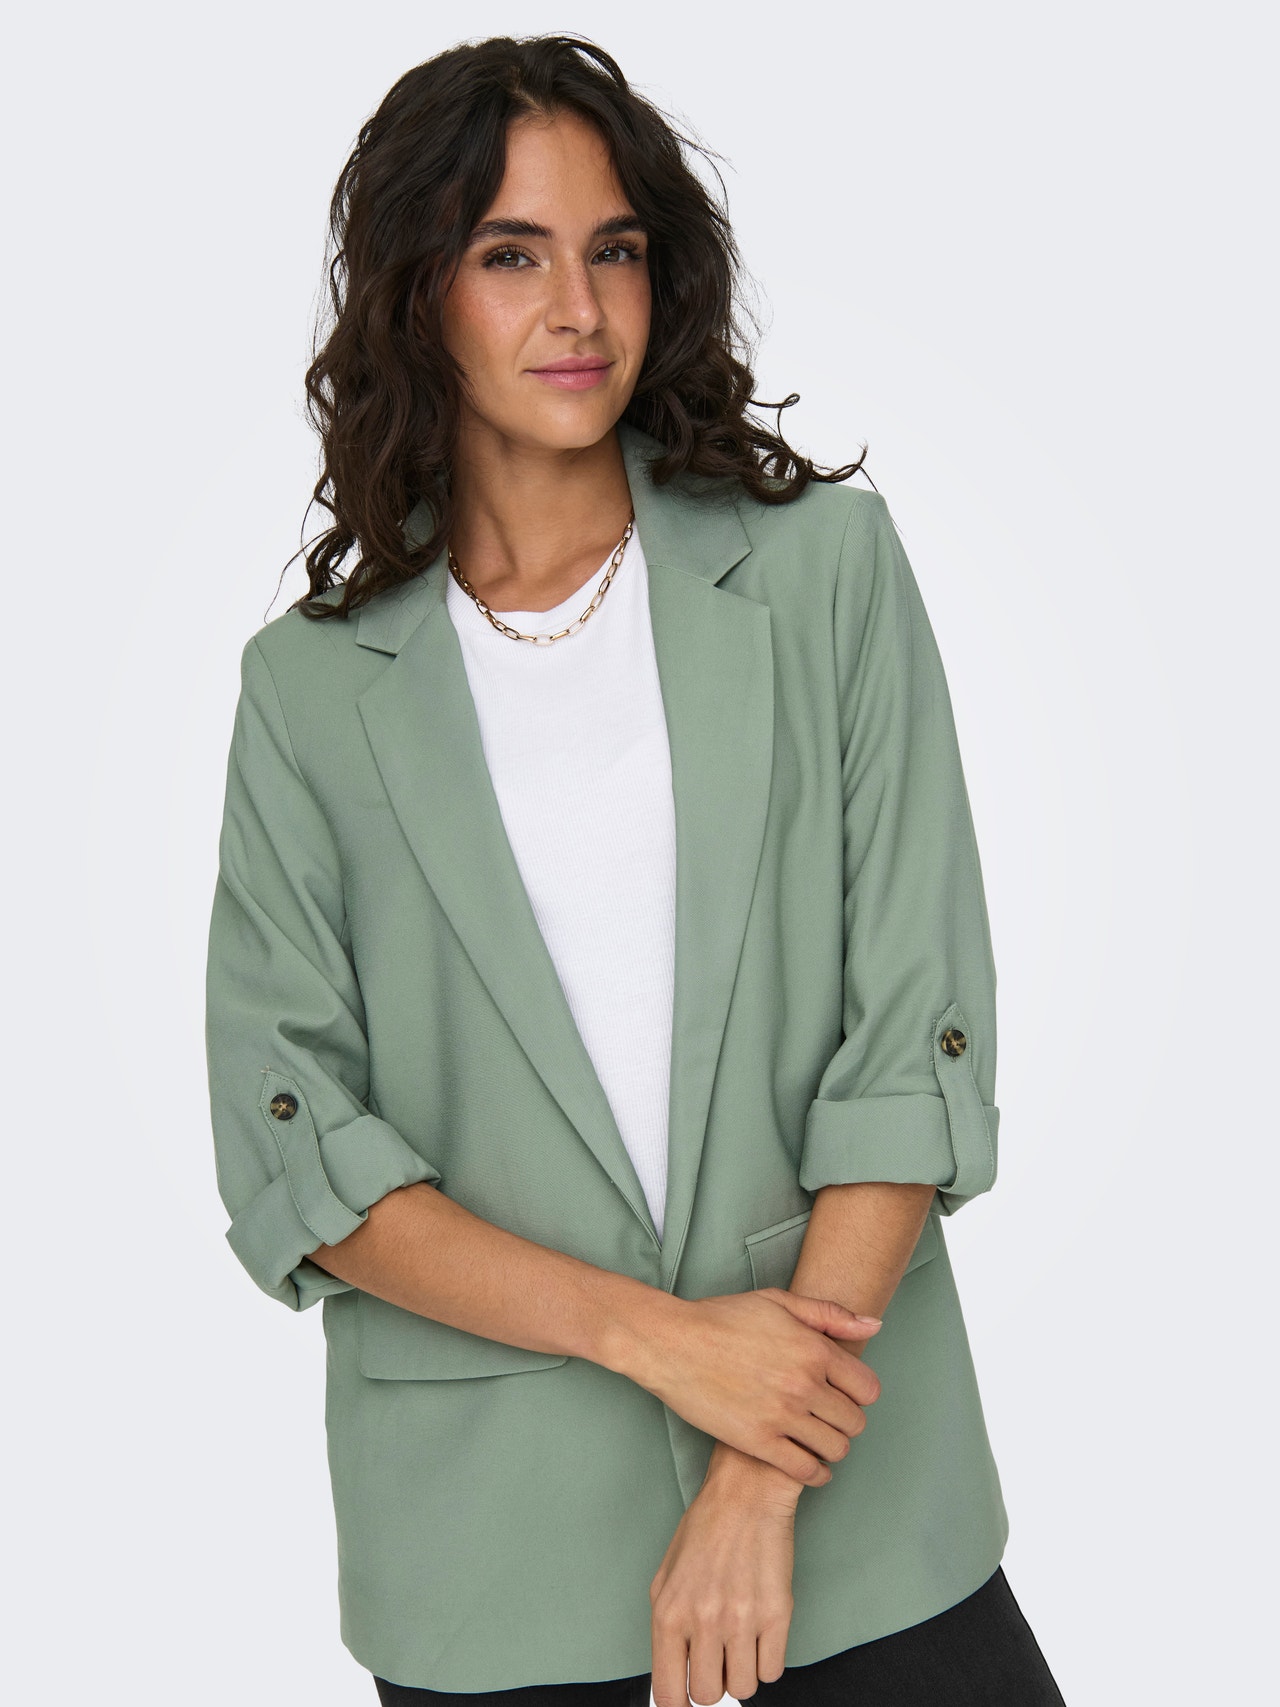 ONLY Loose Fit Reverse Blazer -Lily Pad - 15310839